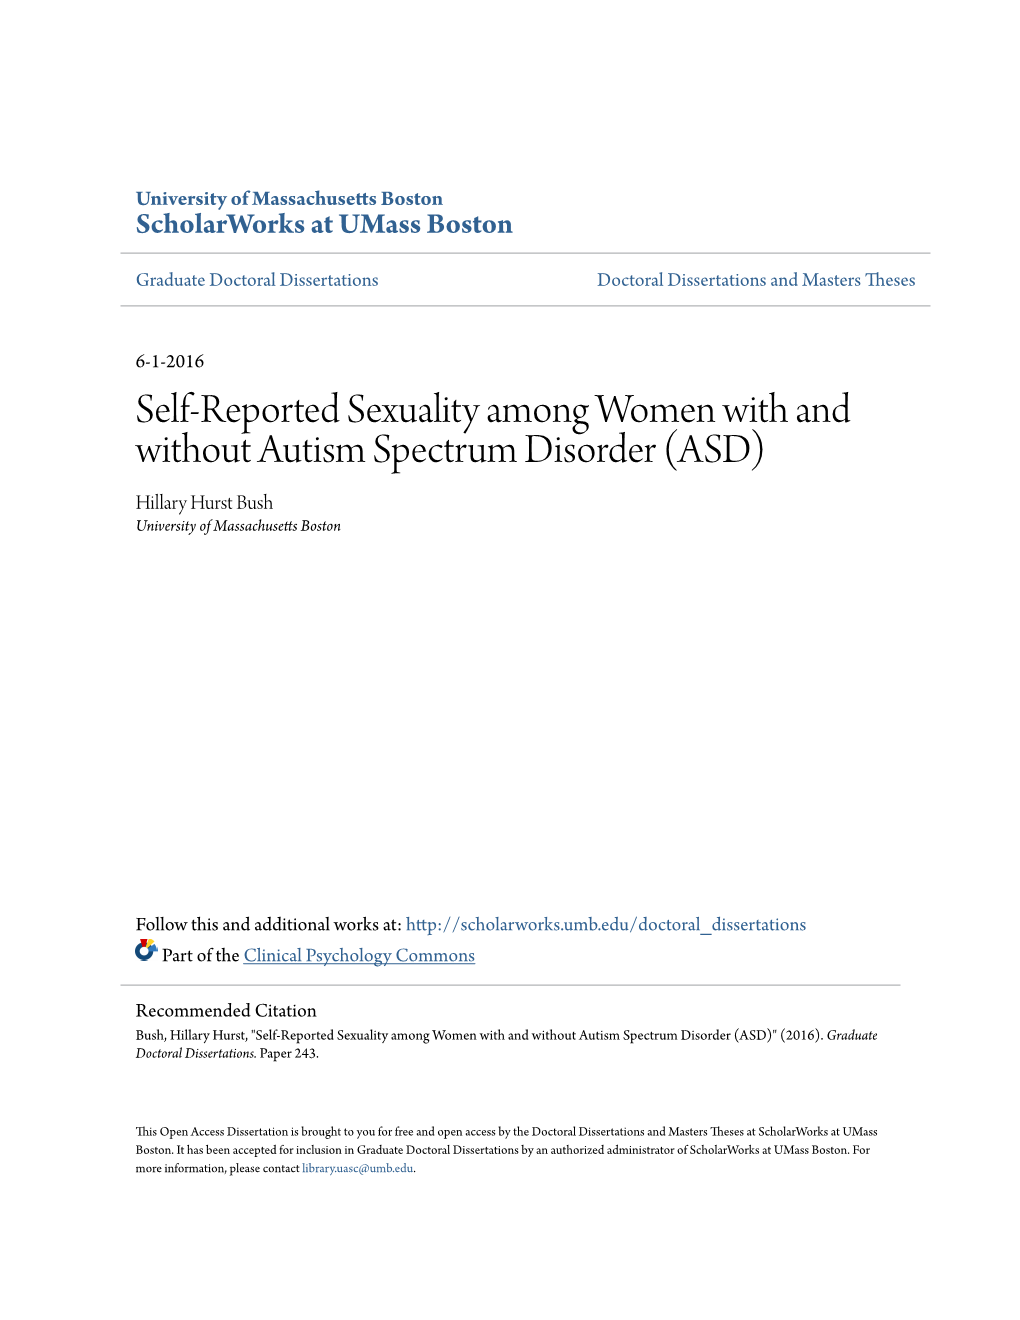 Self-Reported Sexuality Among Women with and Without Autism Spectrum Disorder (ASD) Hillary Hurst Bush University of Massachusetts Boston